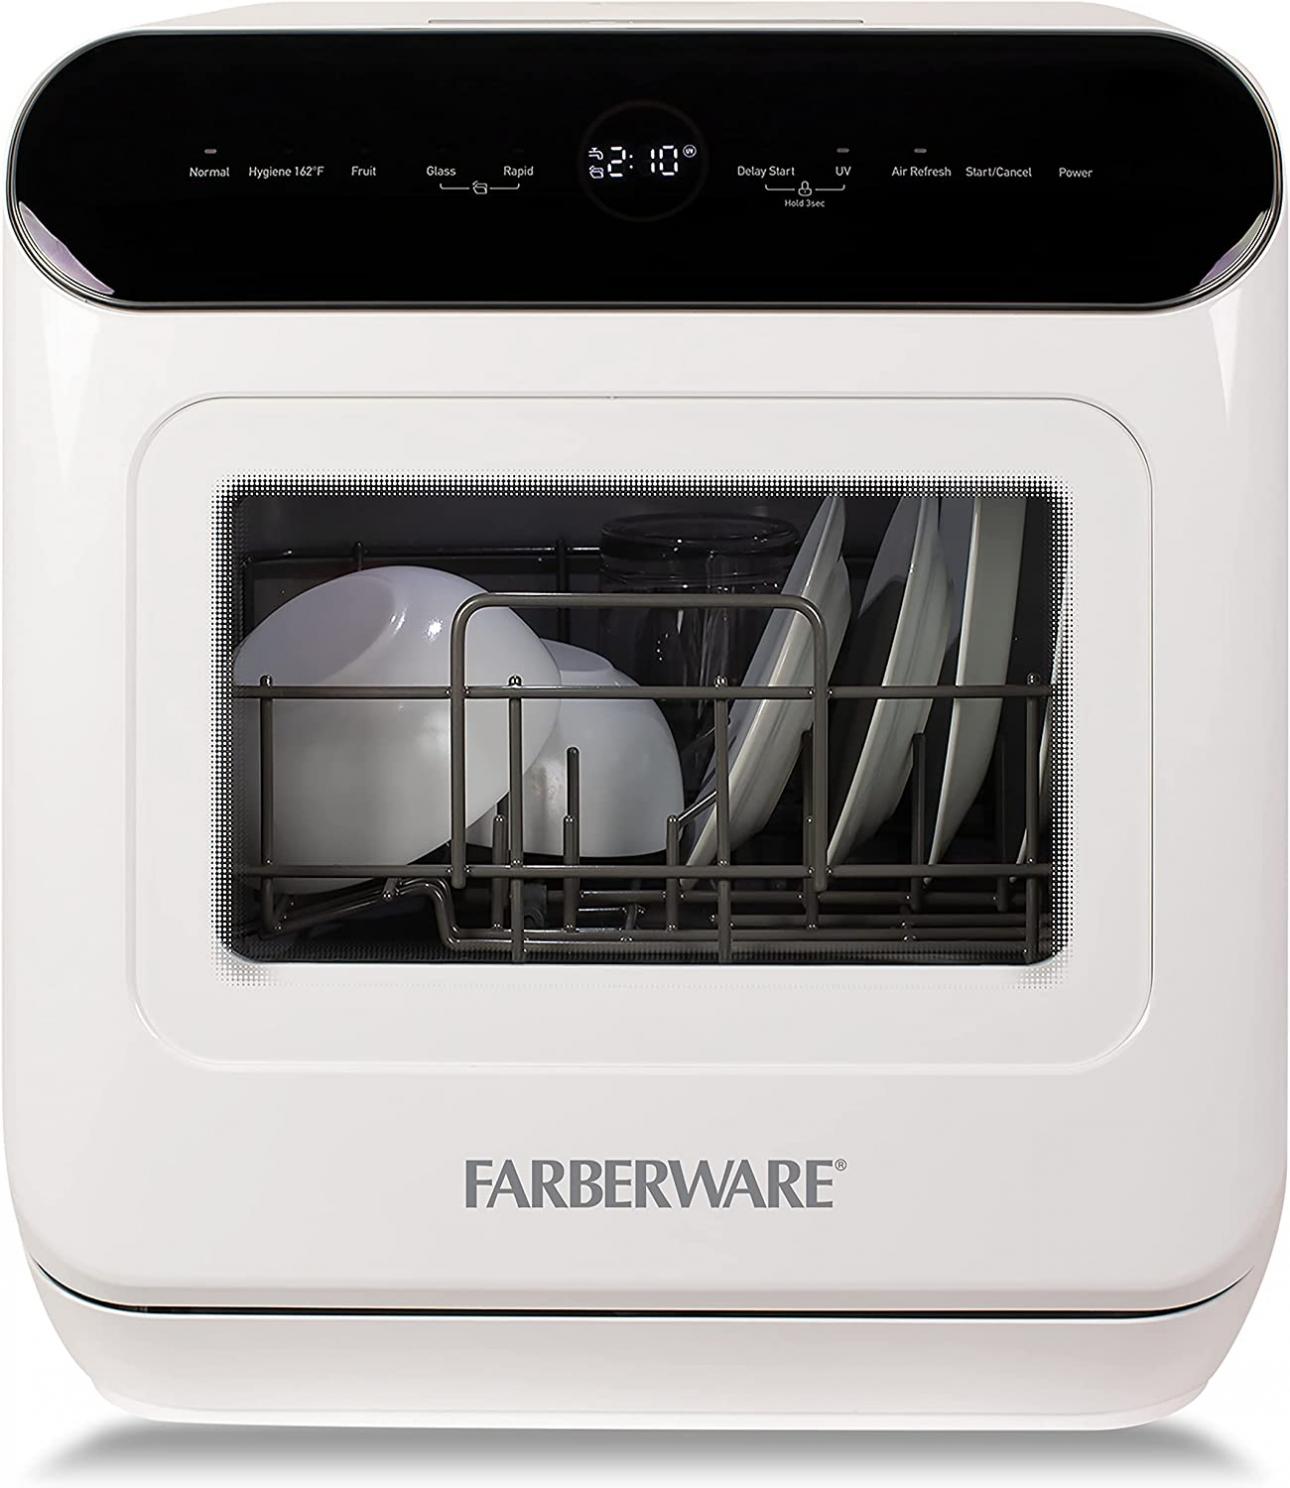 Farberware FCDMGDWH Complete Portable Countertop Dishwasher with LED Light 2 Place Settings, 5 Wash Programs, Glass Door, White